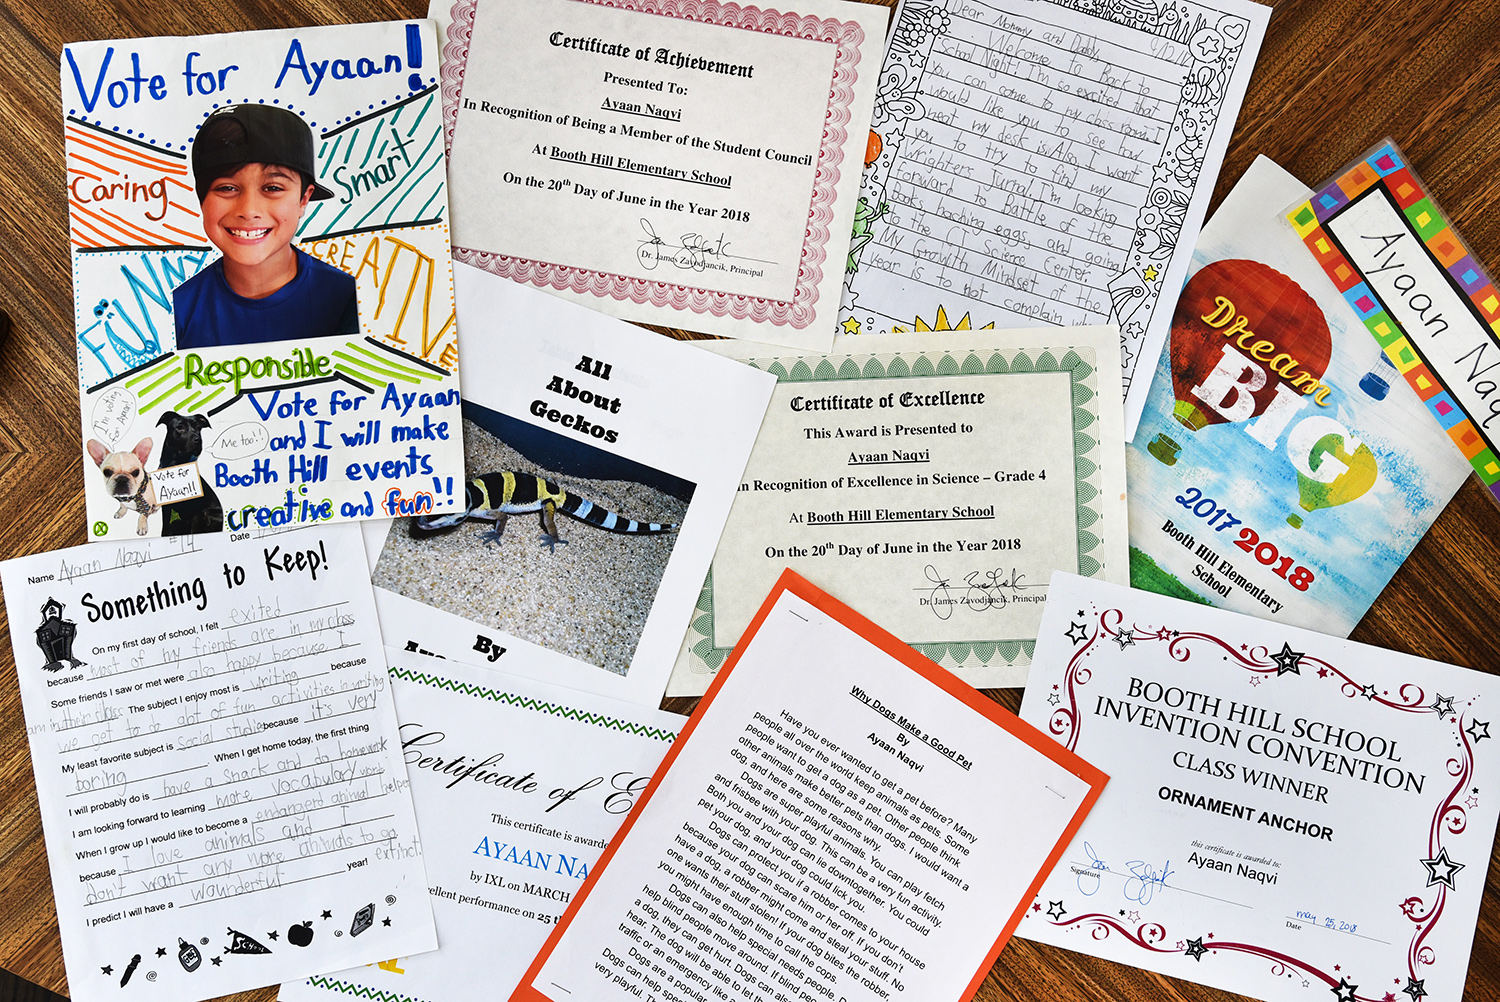 An array of certificates, reports or hand drawn campaign posters by Ayaan Naqvi